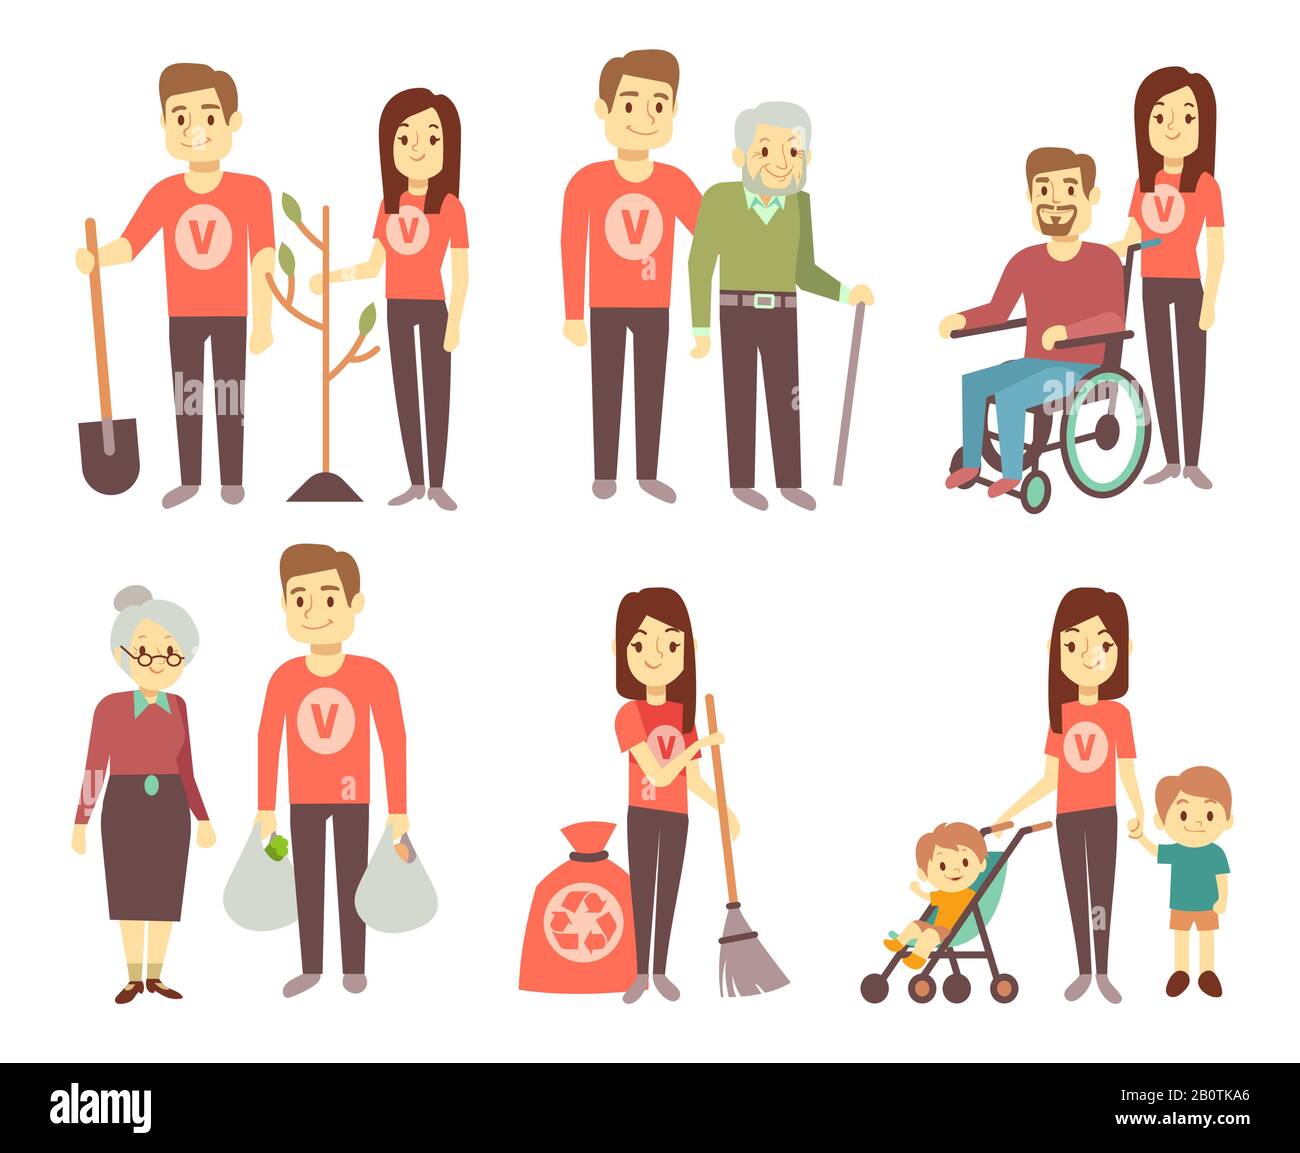 Volunteer helping to disabled people vector characters set for volunteering concept. Volunteer help and assistance disability people illustration Stock Vector